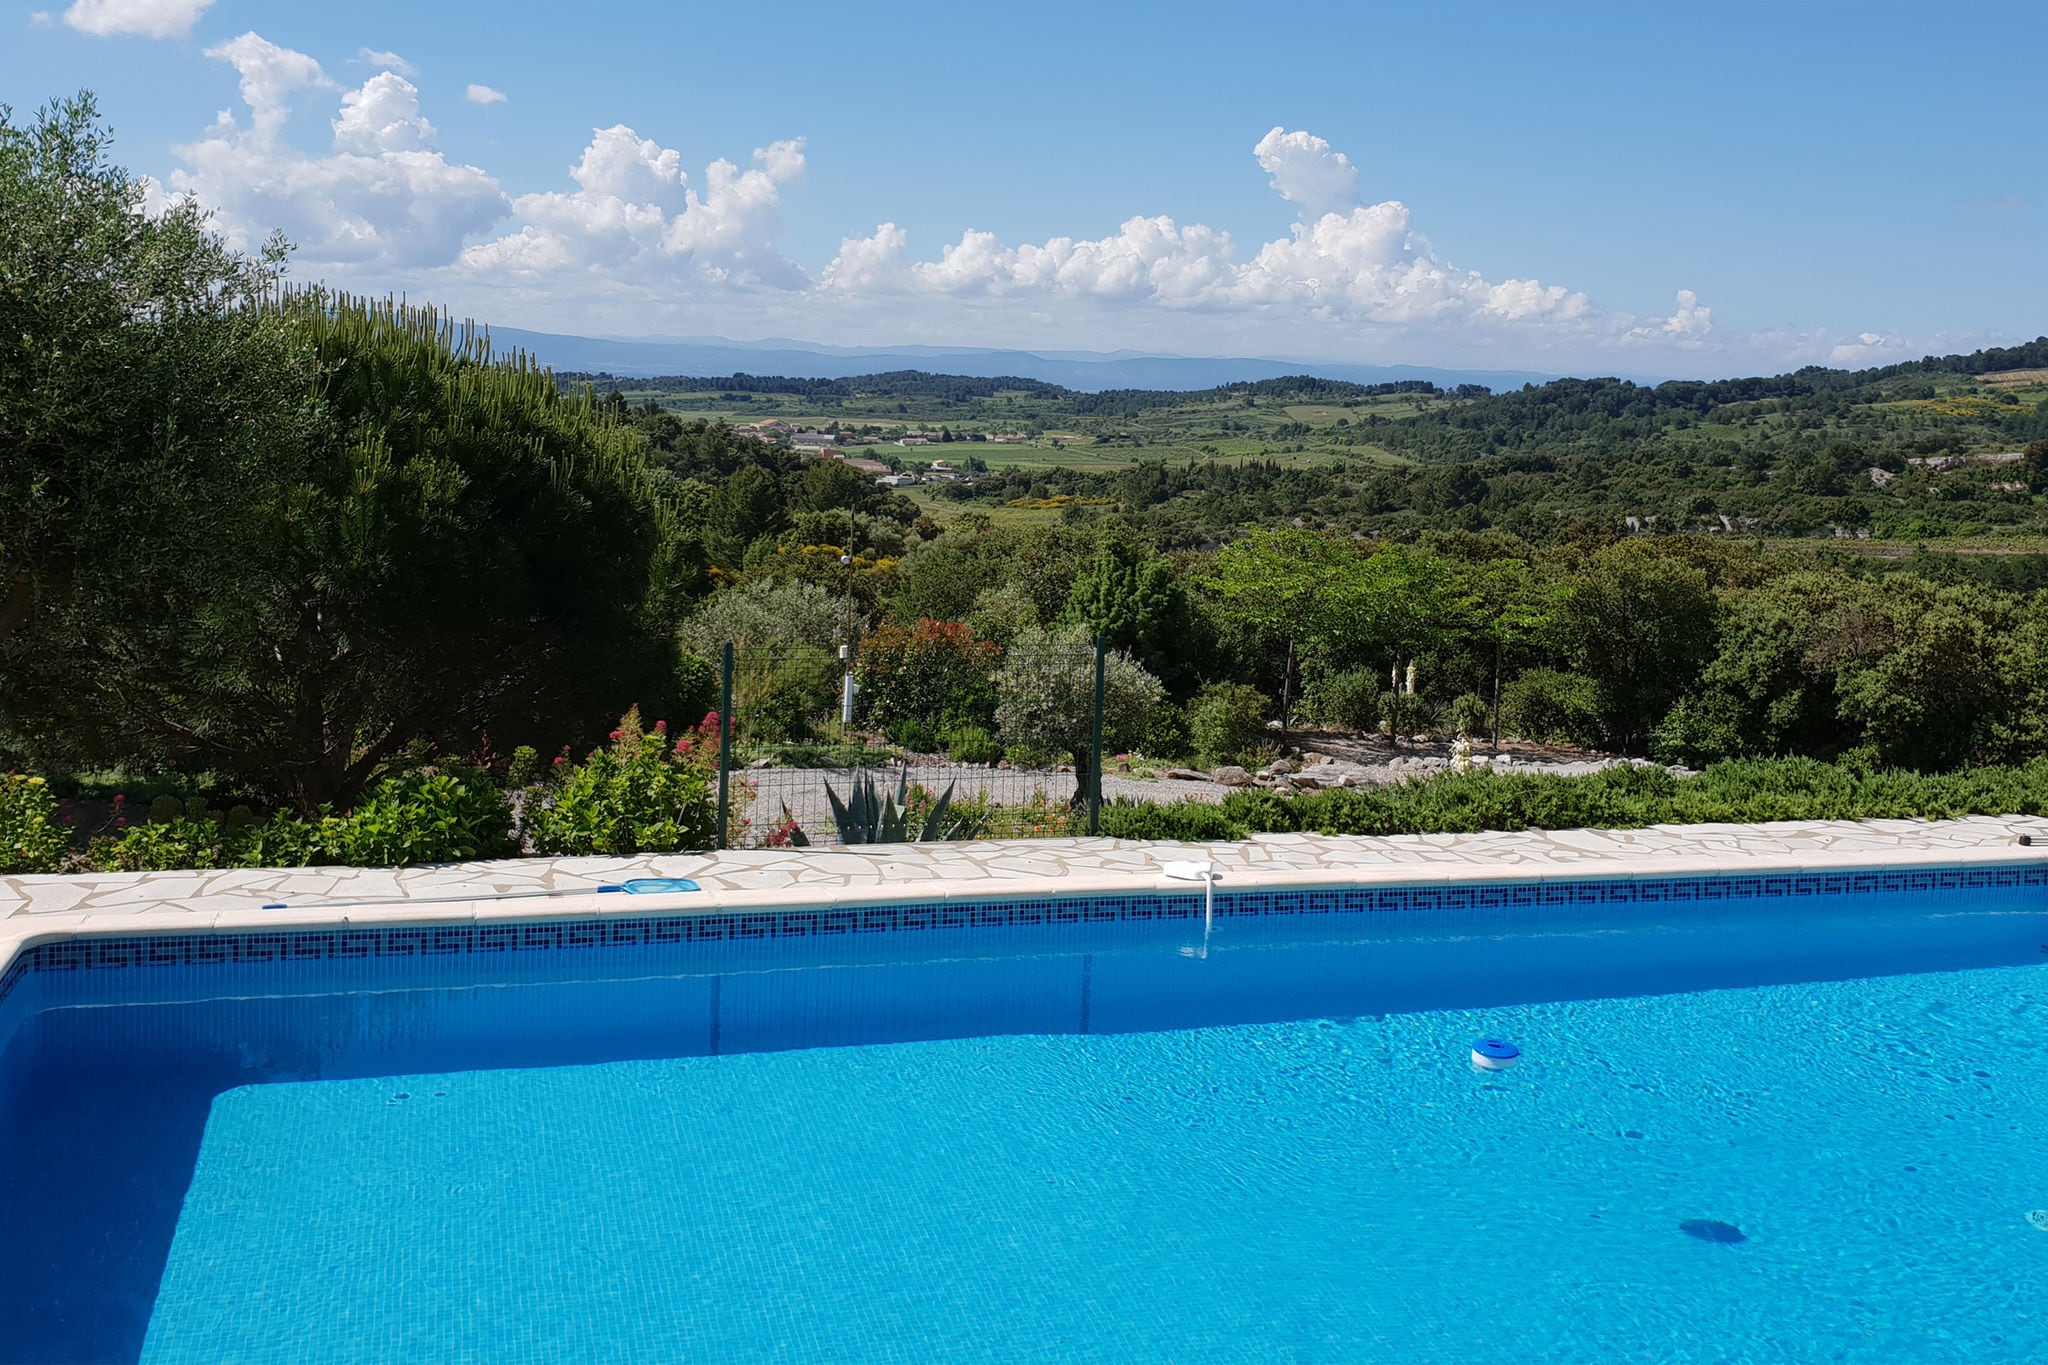 Air-conditioned villa with heated pool, guesthouse and stunning views